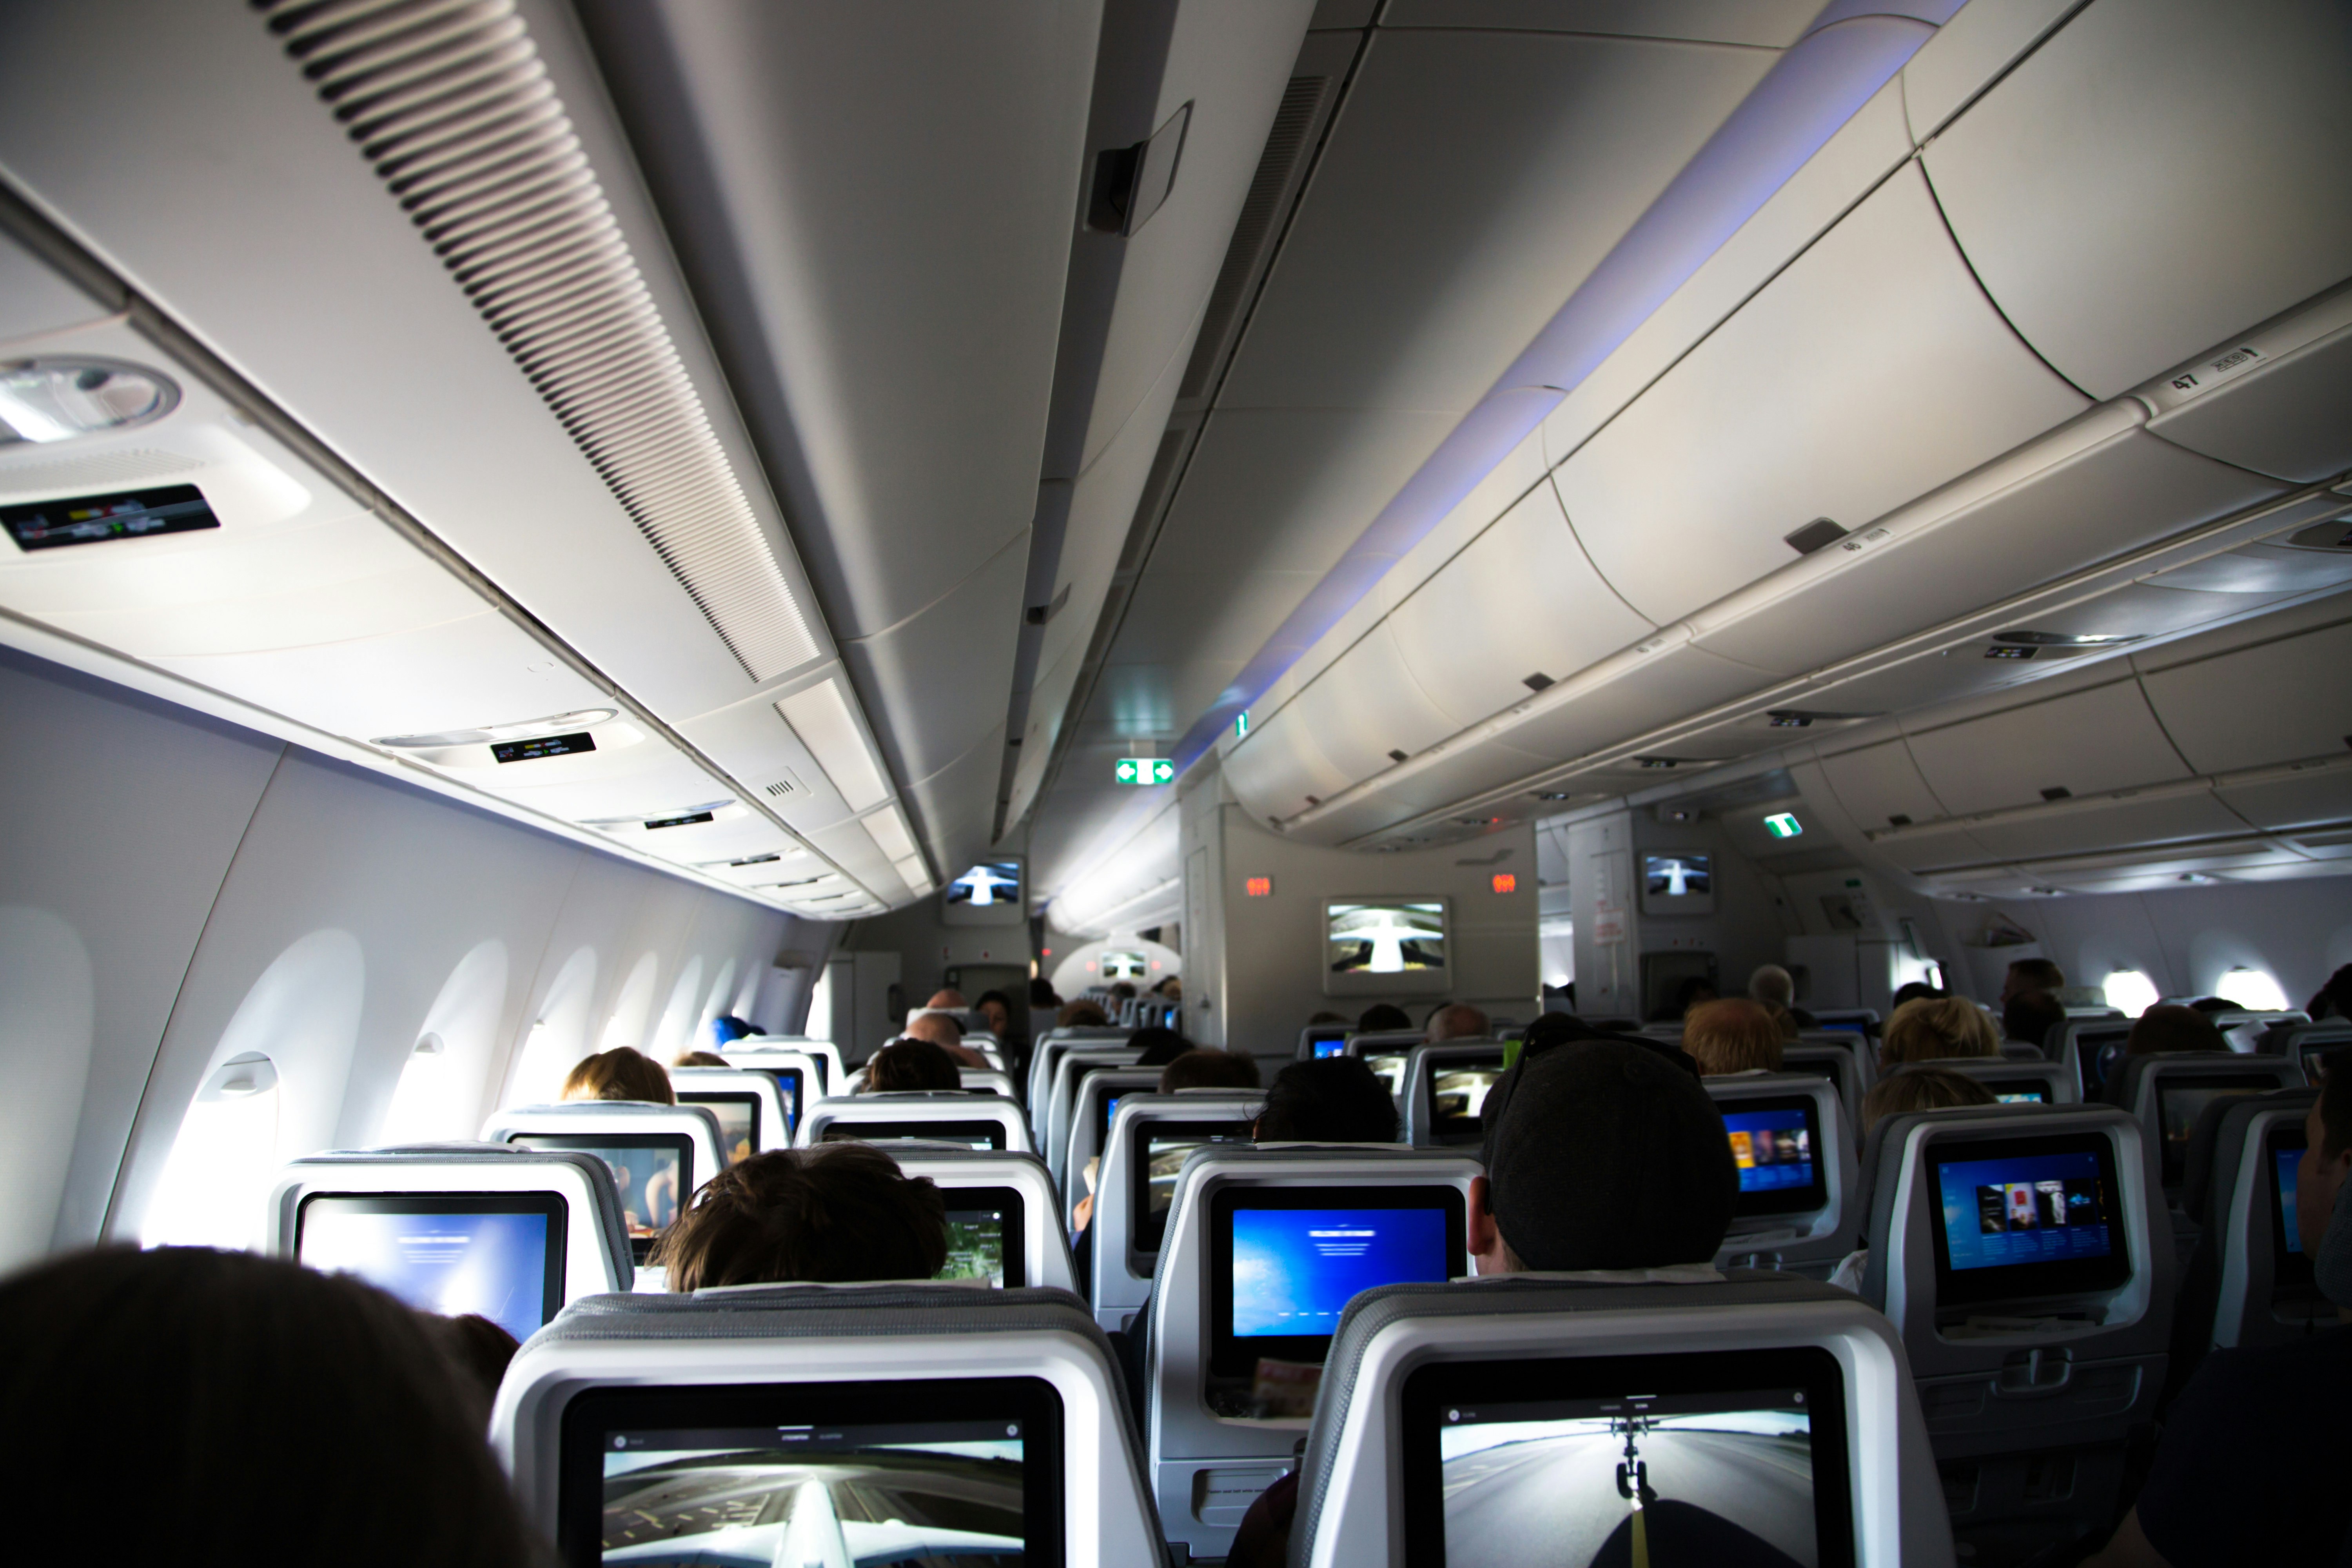 Passengers look at screens in front of them inside a plane